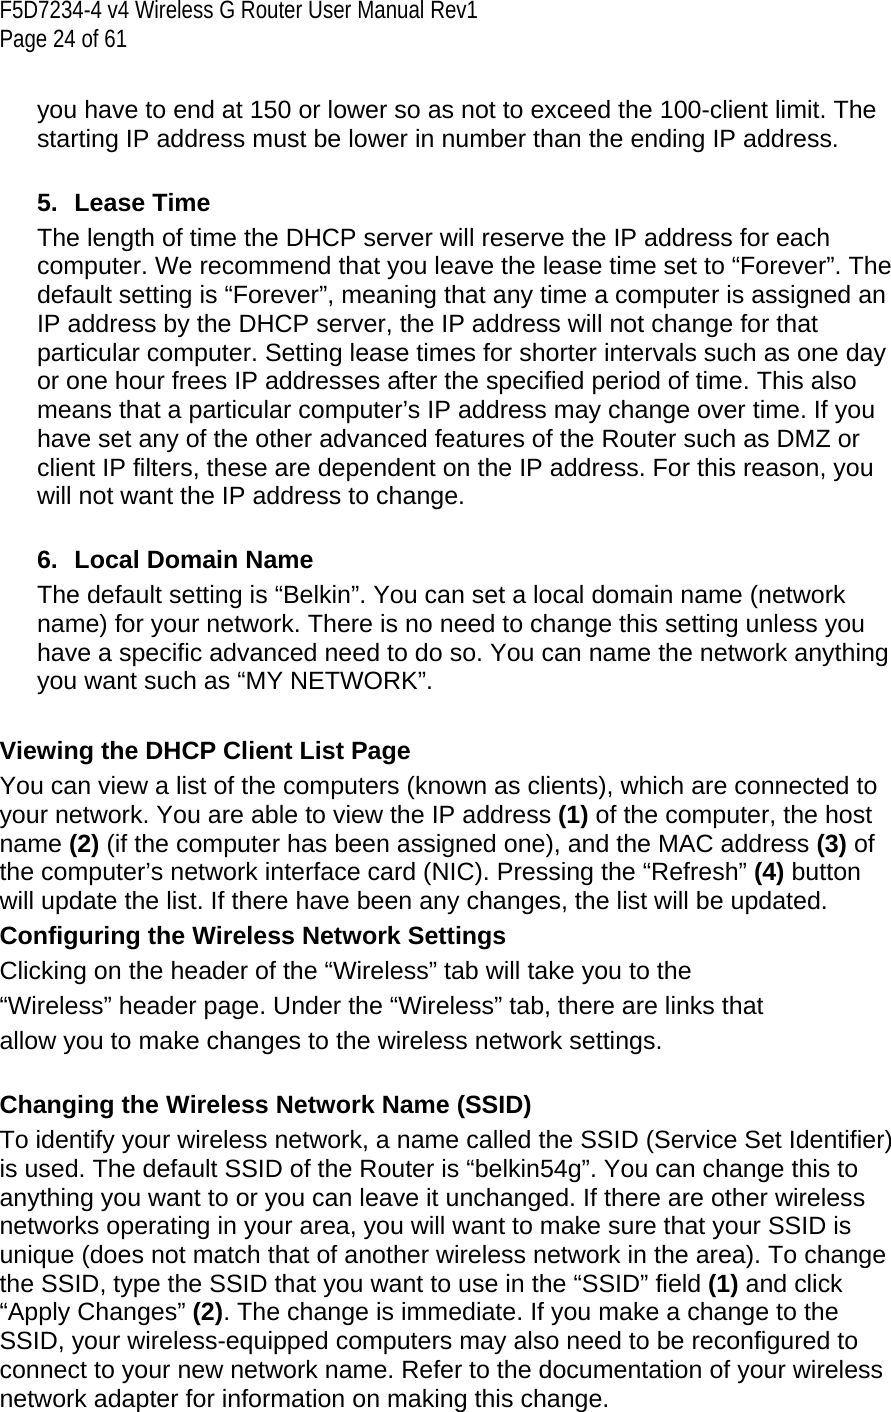 F5D7234-4 v4 Wireless G Router User Manual Rev1  Page 24 of 61   you have to end at 150 or lower so as not to exceed the 100-client limit. The starting IP address must be lower in number than the ending IP address.  5. Lease Time The length of time the DHCP server will reserve the IP address for each computer. We recommend that you leave the lease time set to “Forever”. The default setting is “Forever”, meaning that any time a computer is assigned an IP address by the DHCP server, the IP address will not change for that particular computer. Setting lease times for shorter intervals such as one day or one hour frees IP addresses after the specified period of time. This also means that a particular computer’s IP address may change over time. If you have set any of the other advanced features of the Router such as DMZ or client IP filters, these are dependent on the IP address. For this reason, you will not want the IP address to change.  6.  Local Domain Name The default setting is “Belkin”. You can set a local domain name (network name) for your network. There is no need to change this setting unless you have a specific advanced need to do so. You can name the network anything you want such as “MY NETWORK”.  Viewing the DHCP Client List Page You can view a list of the computers (known as clients), which are connected to your network. You are able to view the IP address (1) of the computer, the host name (2) (if the computer has been assigned one), and the MAC address (3) of the computer’s network interface card (NIC). Pressing the “Refresh” (4) button will update the list. If there have been any changes, the list will be updated.  Configuring the Wireless Network Settings Clicking on the header of the “Wireless” tab will take you to the “Wireless” header page. Under the “Wireless” tab, there are links that allow you to make changes to the wireless network settings.  Changing the Wireless Network Name (SSID) To identify your wireless network, a name called the SSID (Service Set Identifier) is used. The default SSID of the Router is “belkin54g”. You can change this to anything you want to or you can leave it unchanged. If there are other wireless networks operating in your area, you will want to make sure that your SSID is unique (does not match that of another wireless network in the area). To change the SSID, type the SSID that you want to use in the “SSID” field (1) and click “Apply Changes” (2). The change is immediate. If you make a change to the SSID, your wireless-equipped computers may also need to be reconfigured to connect to your new network name. Refer to the documentation of your wireless network adapter for information on making this change.  